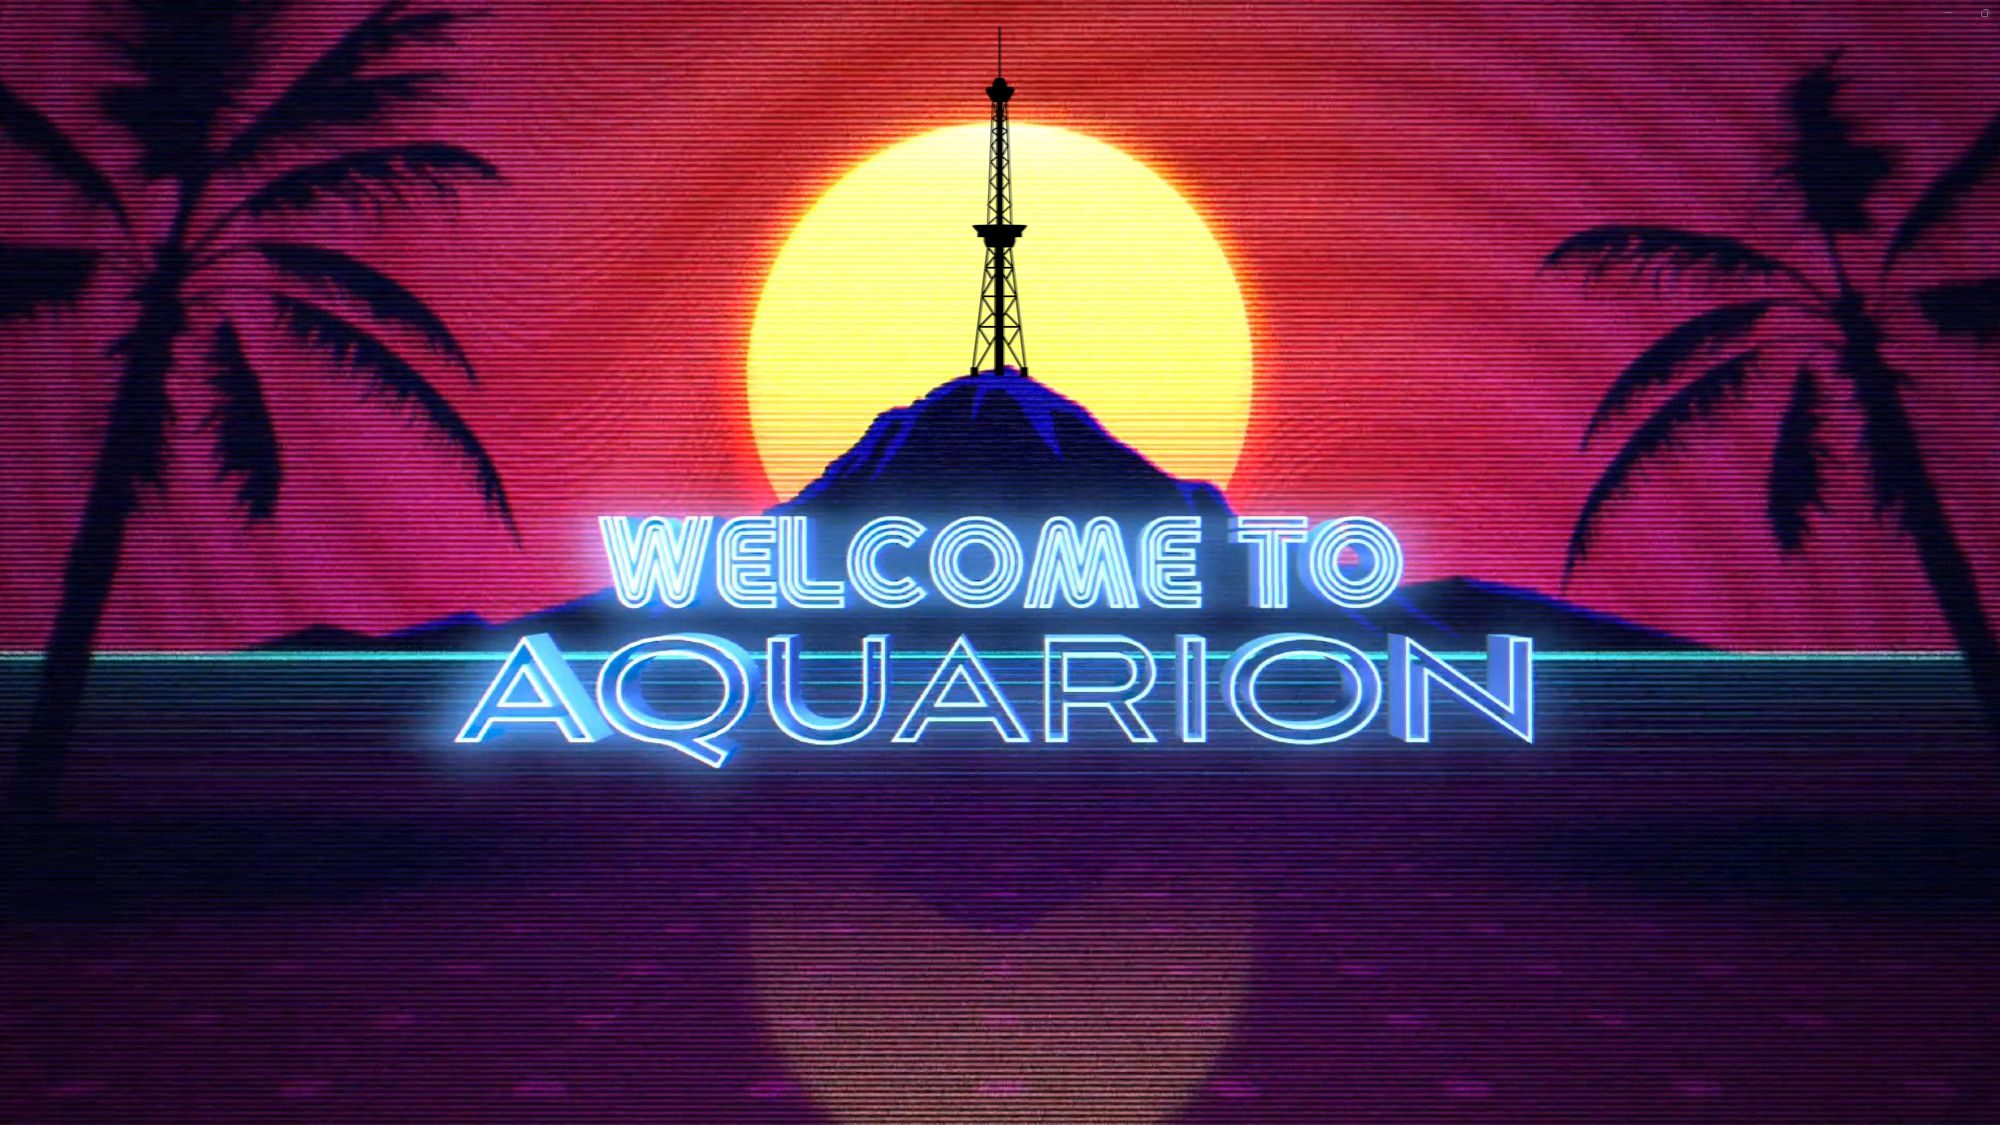 Welcome to Aquarion (the fictional Actual play in the world of Replay) written in a cyberpunk style, overlaying an island and a radio tower with the moon behind it. 